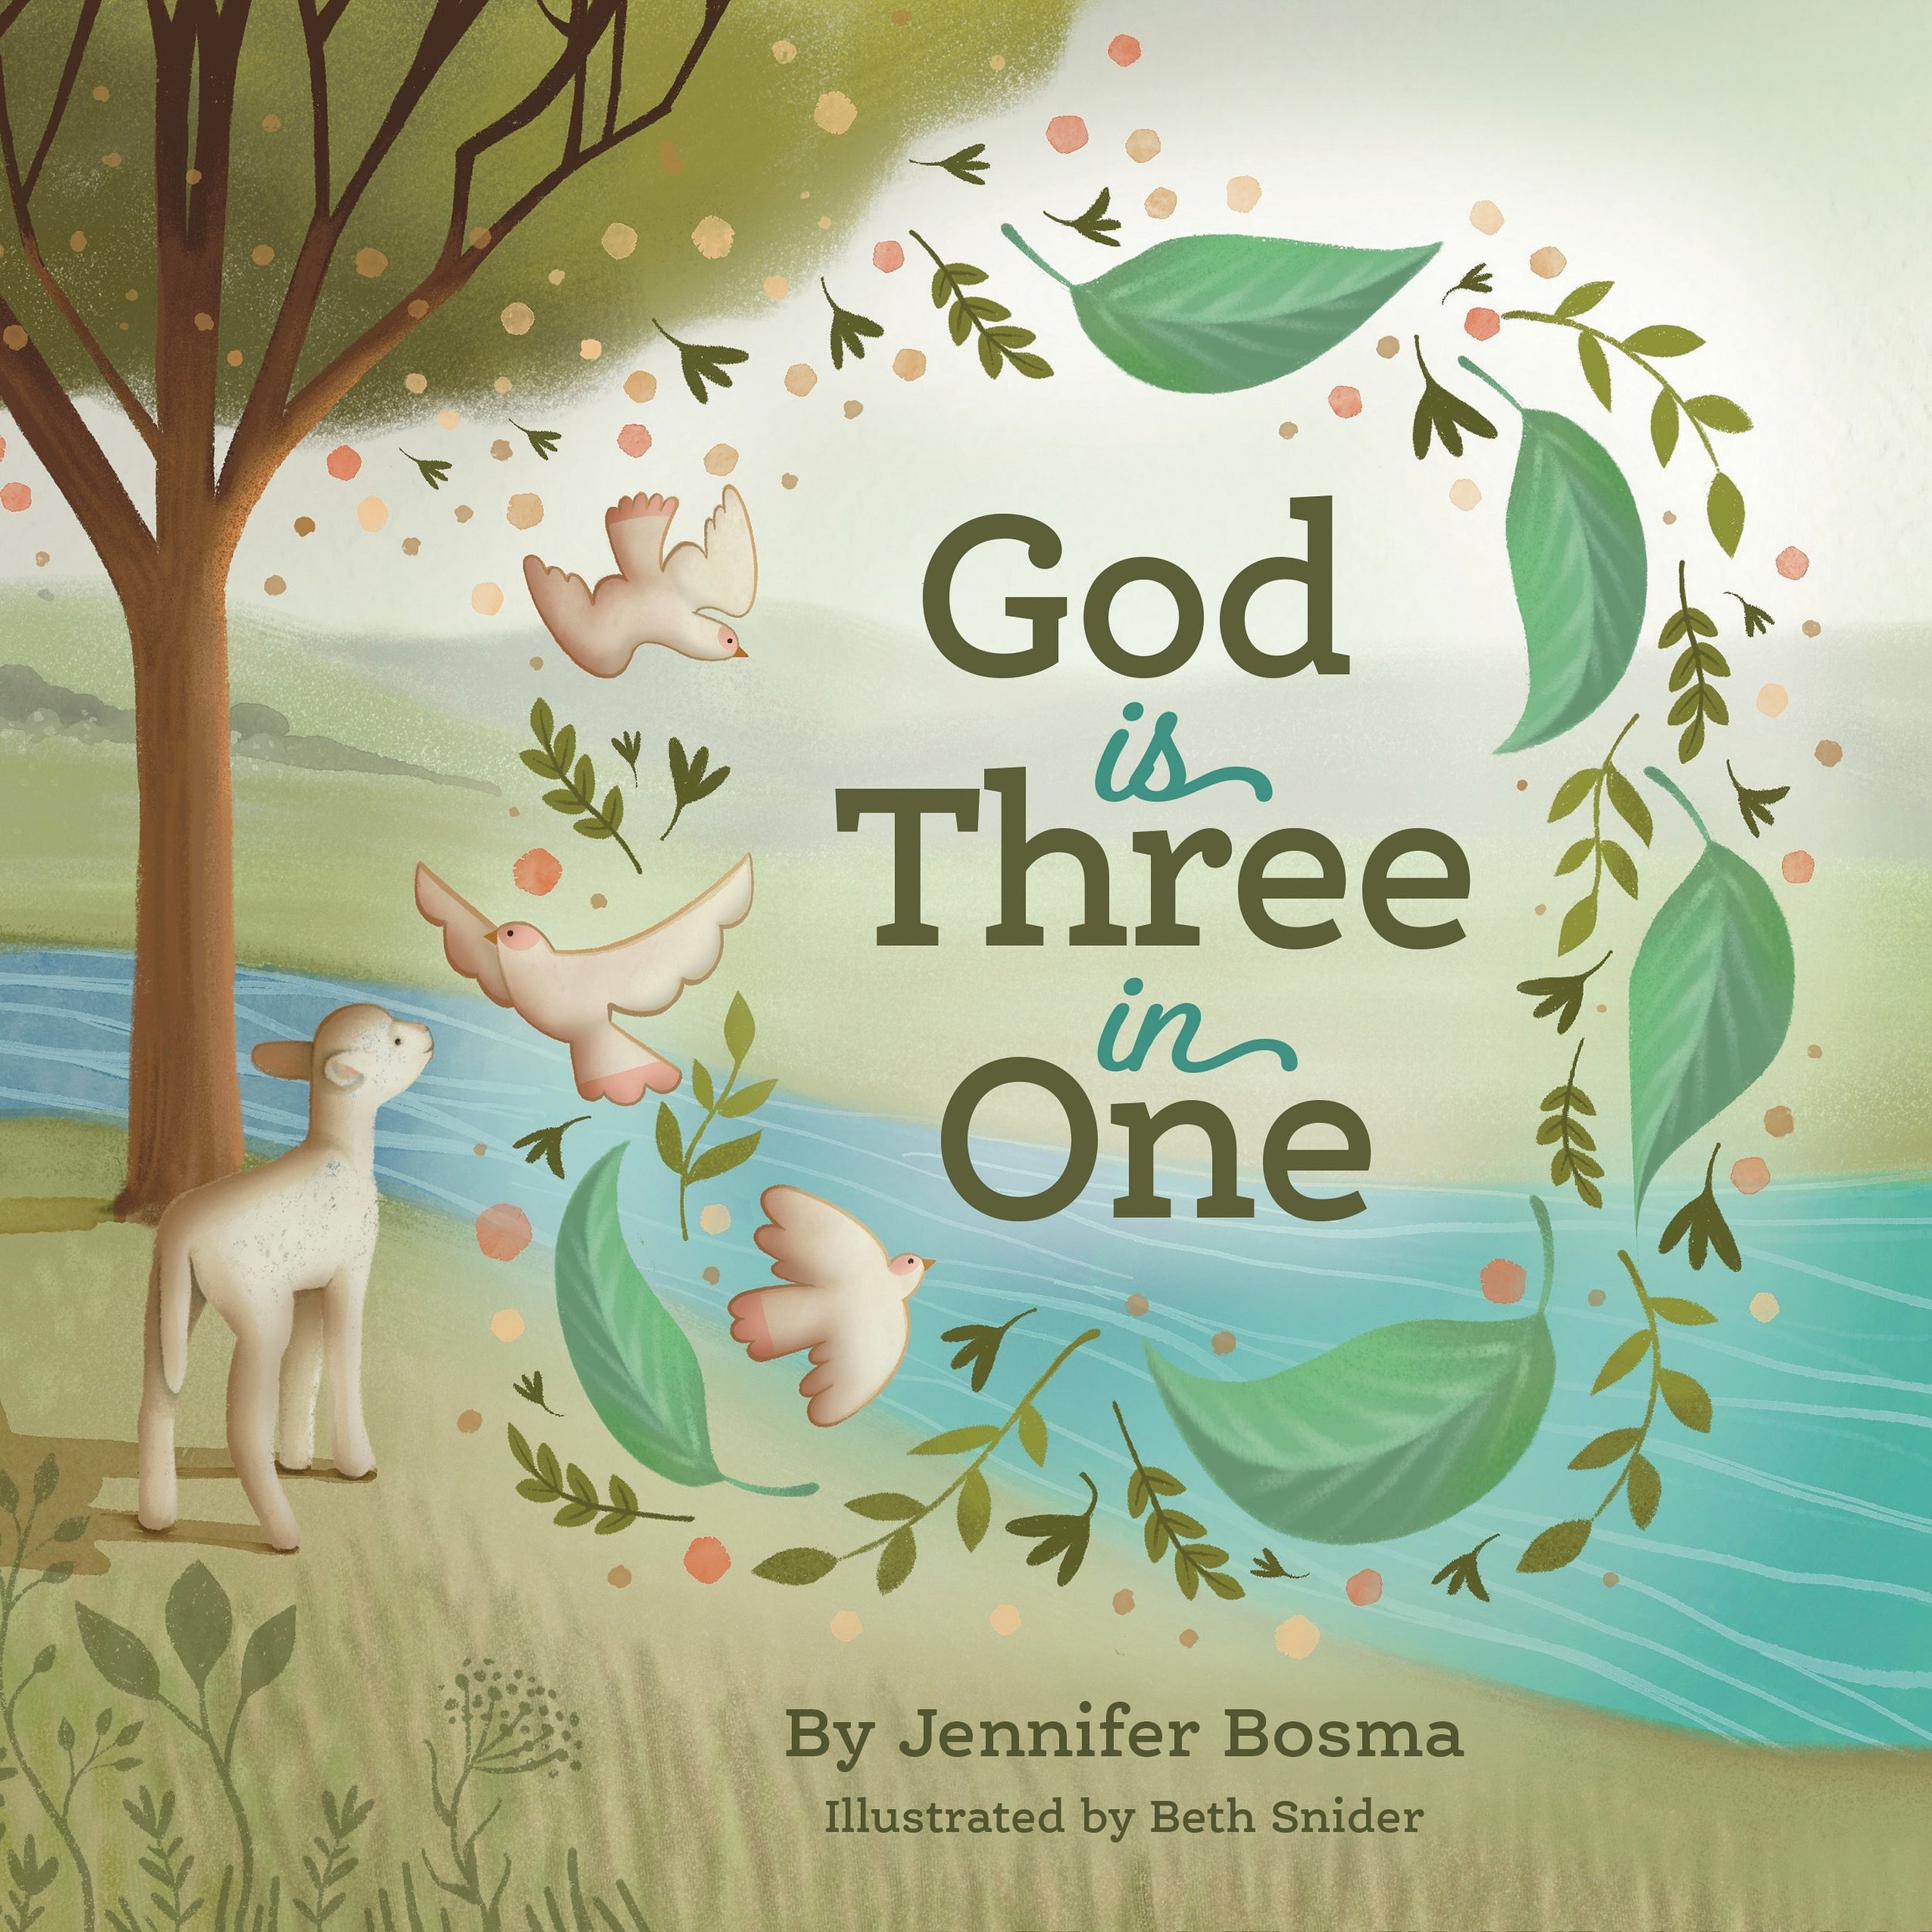 &ldquo;Grandma, who is the Holy Spirit?&rdquo; This question began my third Christian children&rsquo;s book, God is Three in One✝️This books explains God the Father, Son and Holy Spirit all in rhyme. Releasing in September, you can preorder today at 